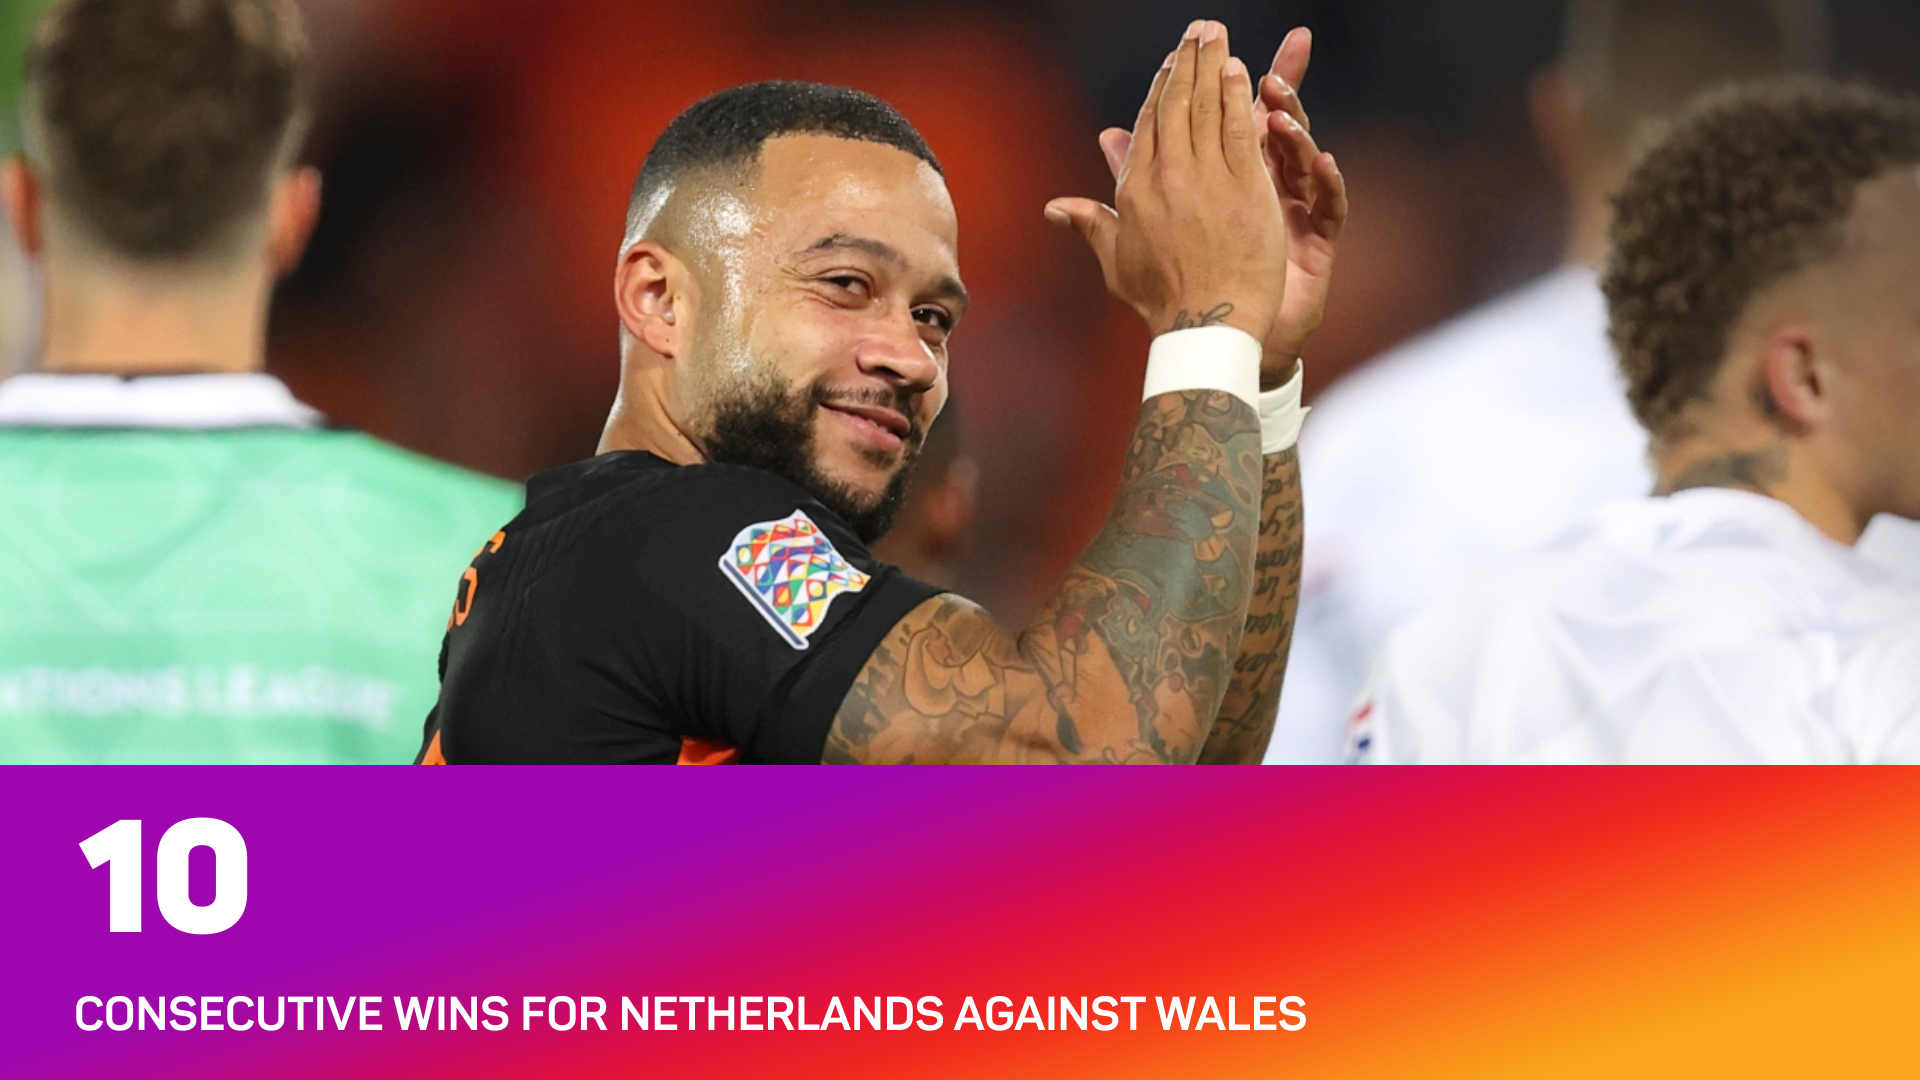 Netherlands winning record against Wales